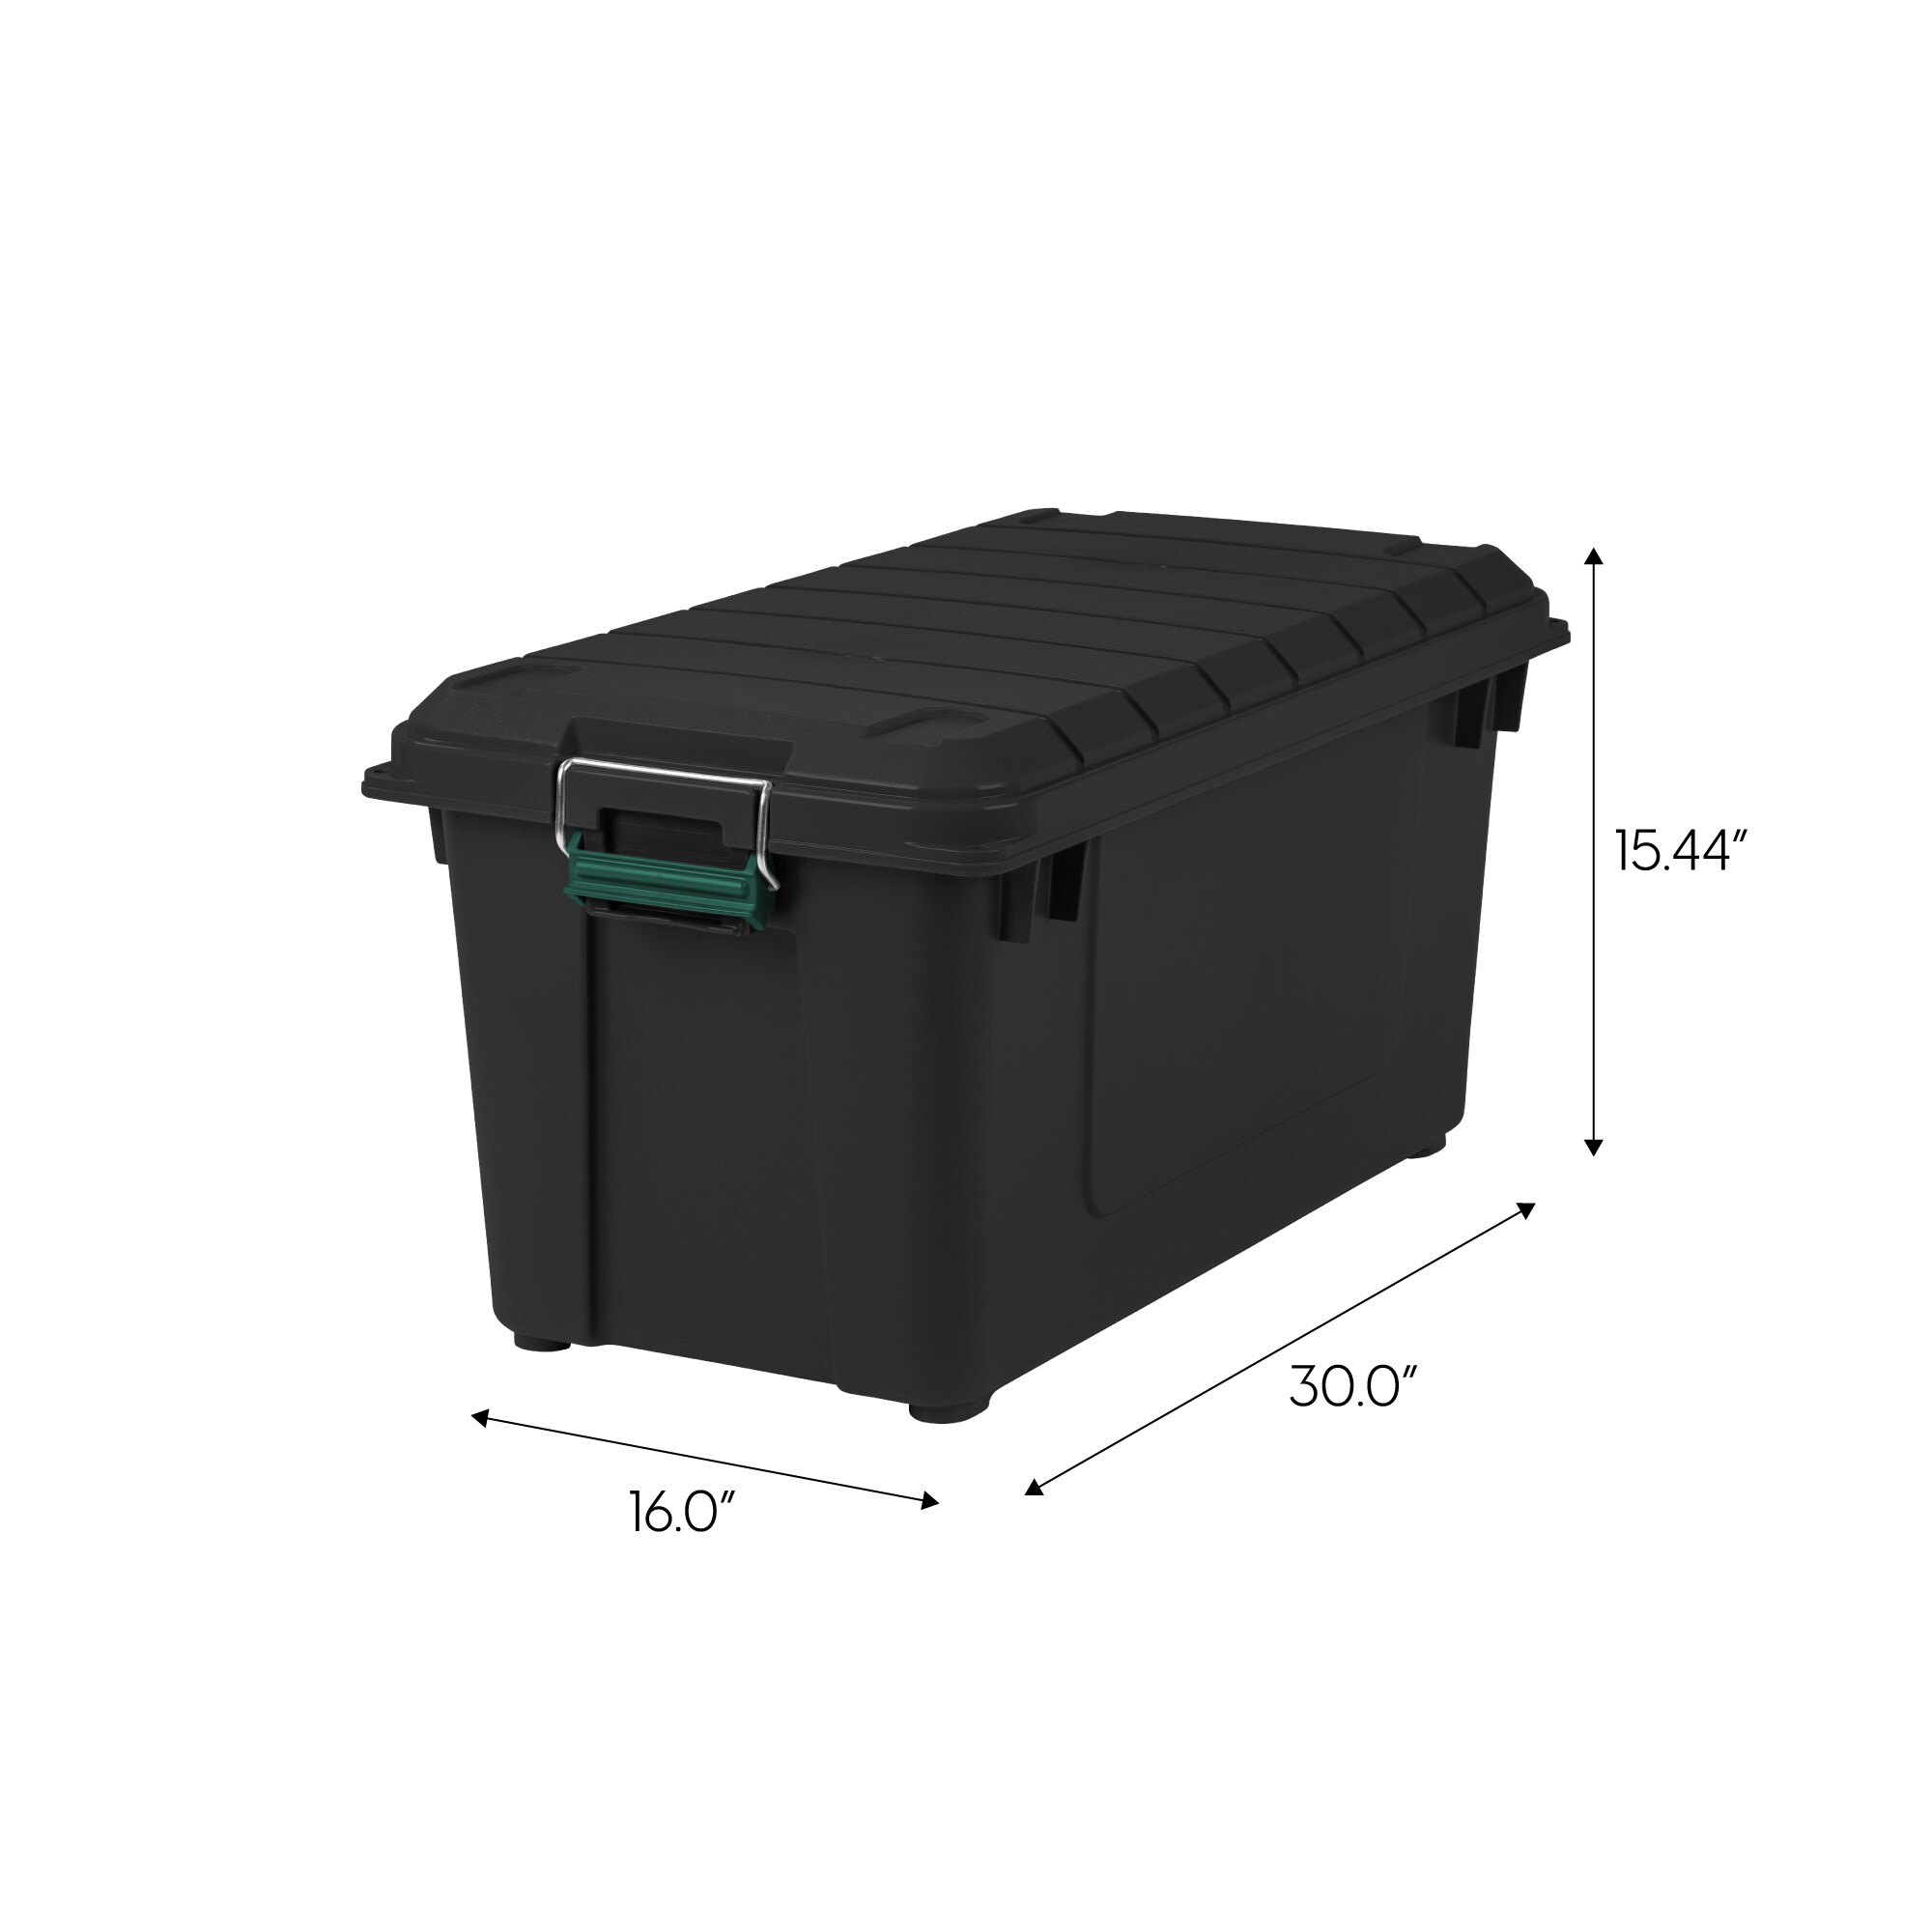 IRIS Weathertight Plastic Storage Containers With Latch Lids 15 38 x 16 x  30 Black Case Of 4 - Office Depot